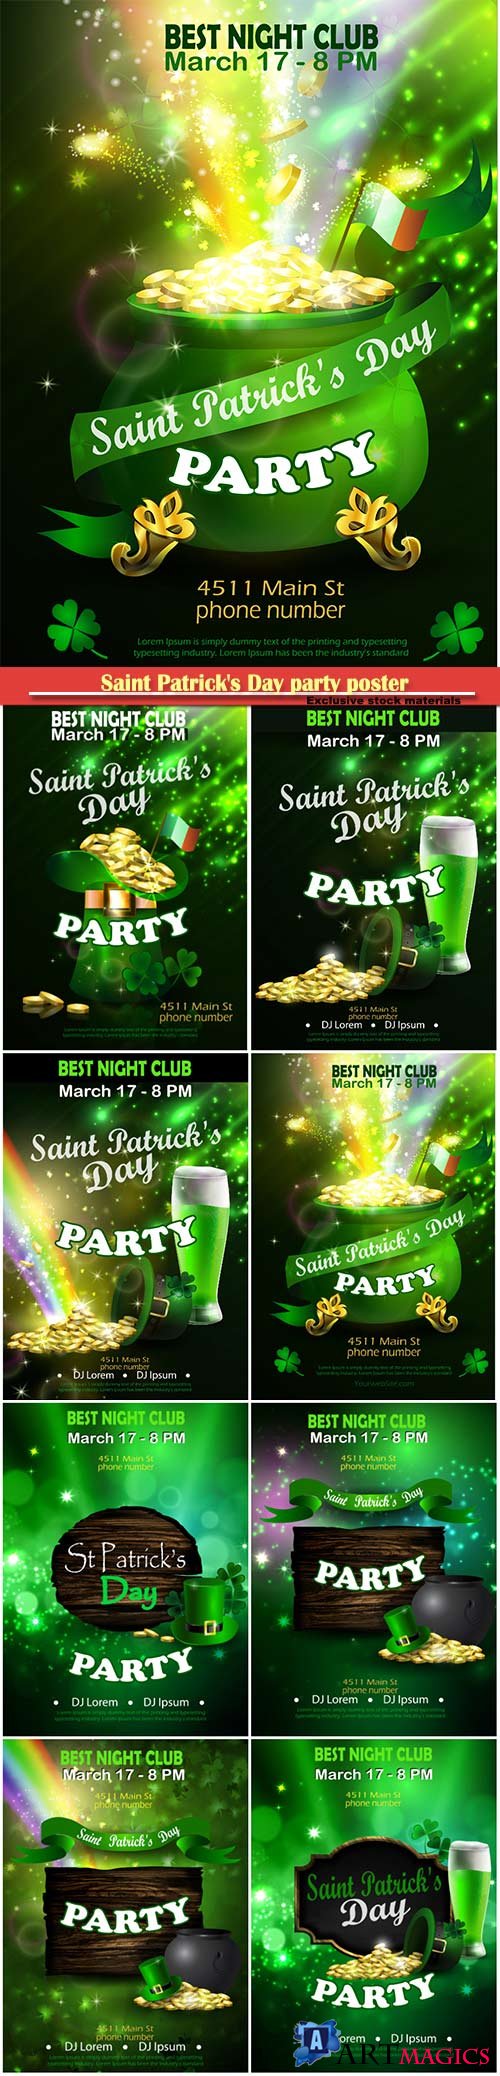 Saint Patrick's Day party poster invitation vector